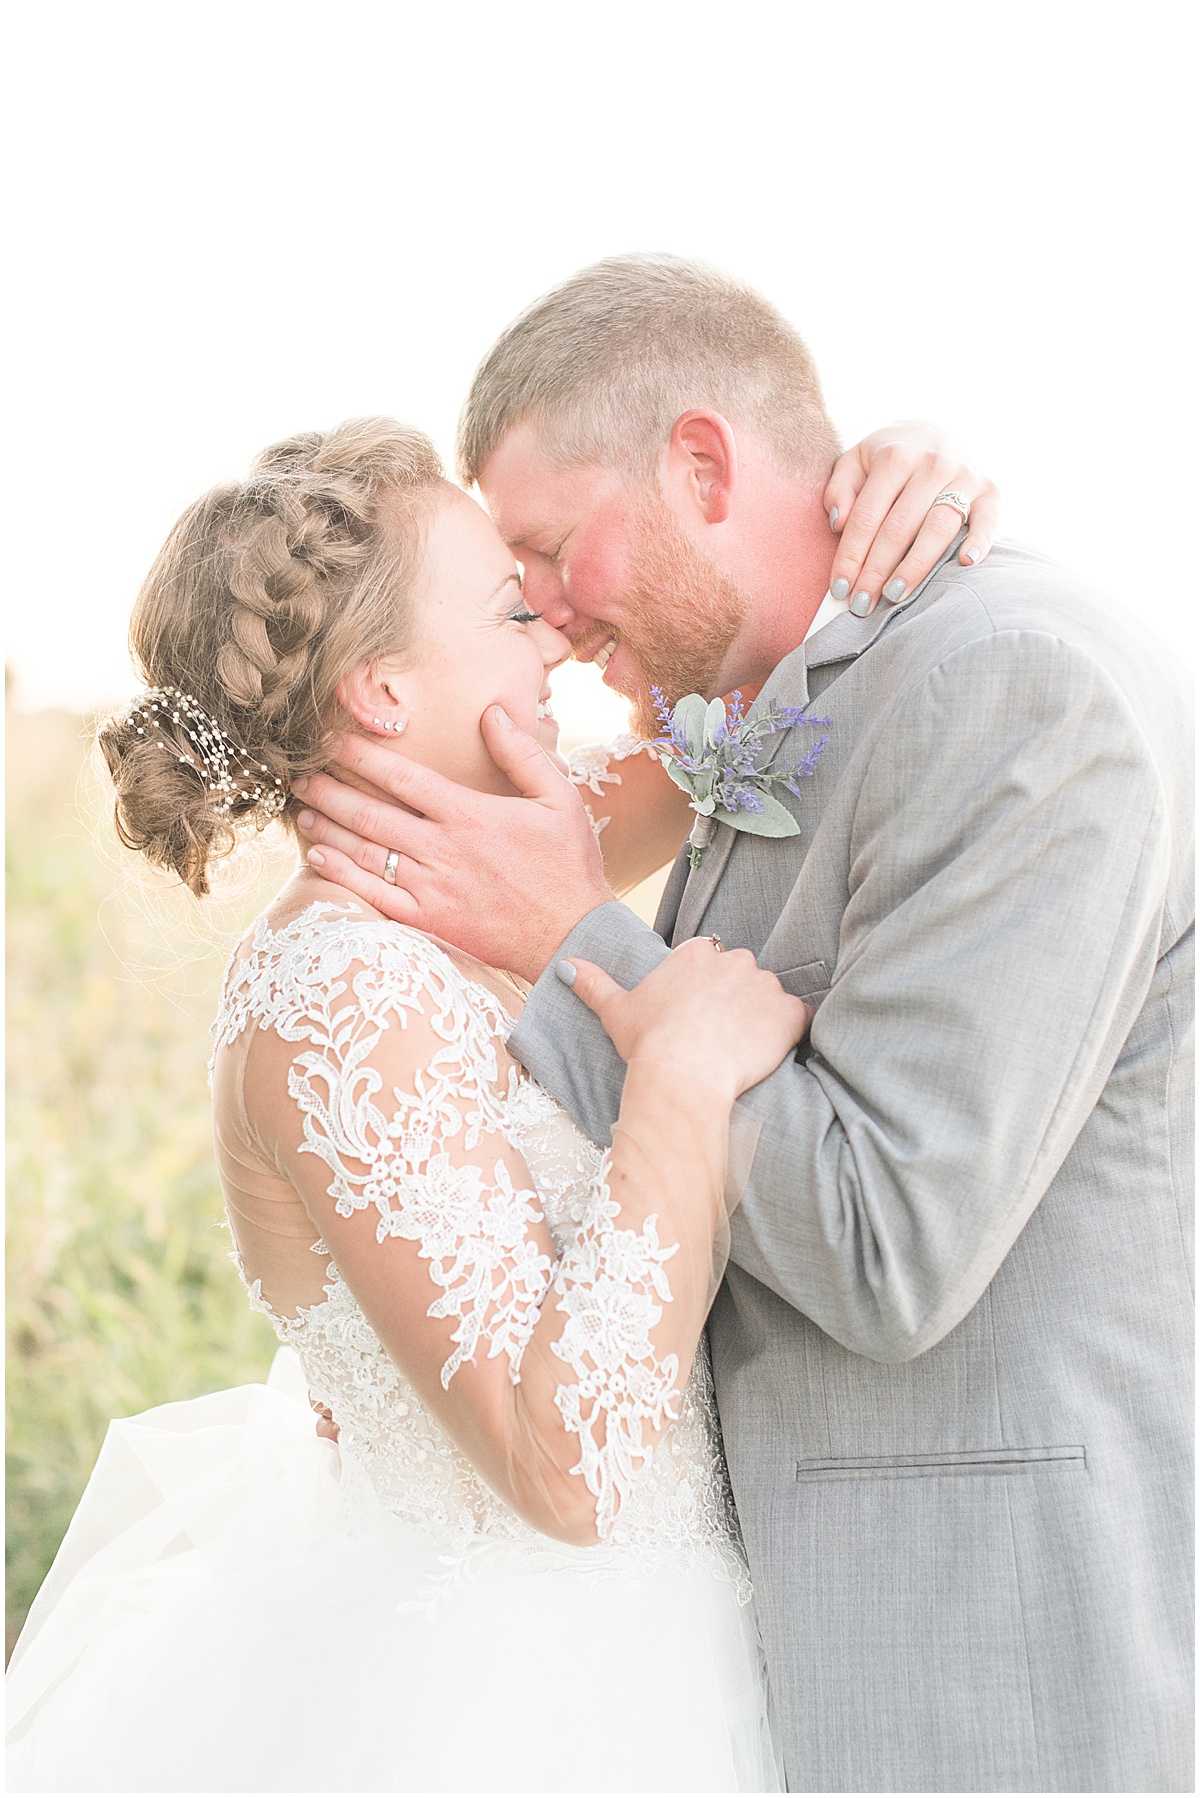 Bride and groom photos for wedding at Wagner Angus Barn in Wolcott, Indiana